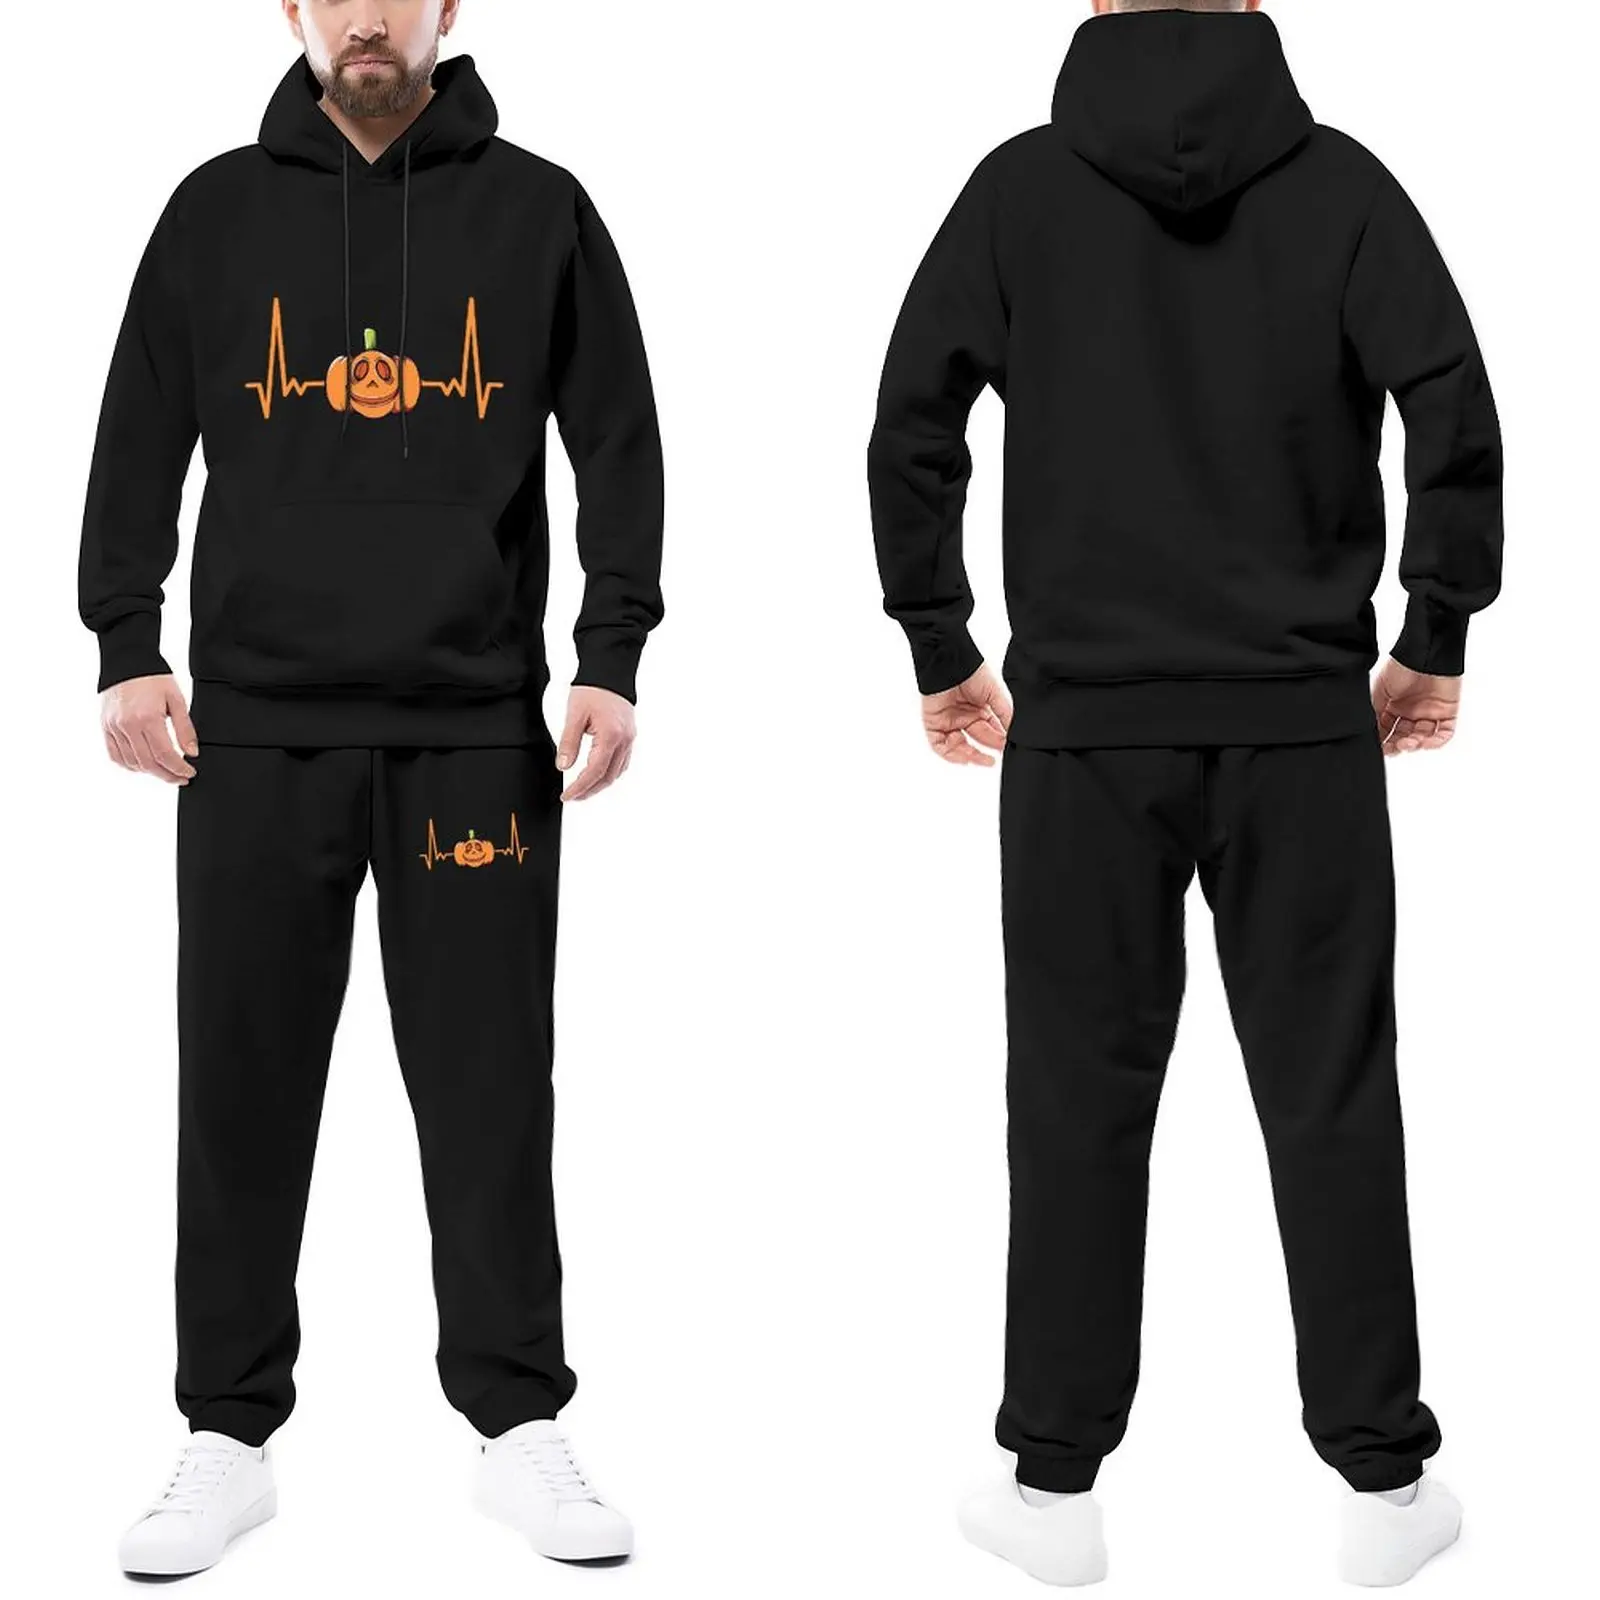 

Trapstar Tracksuits Spooky Halloween Pumpkin Hooded Suits Heartbeat Hooded Suits Oversize Casual Jogger Sportswear Sweatsuits